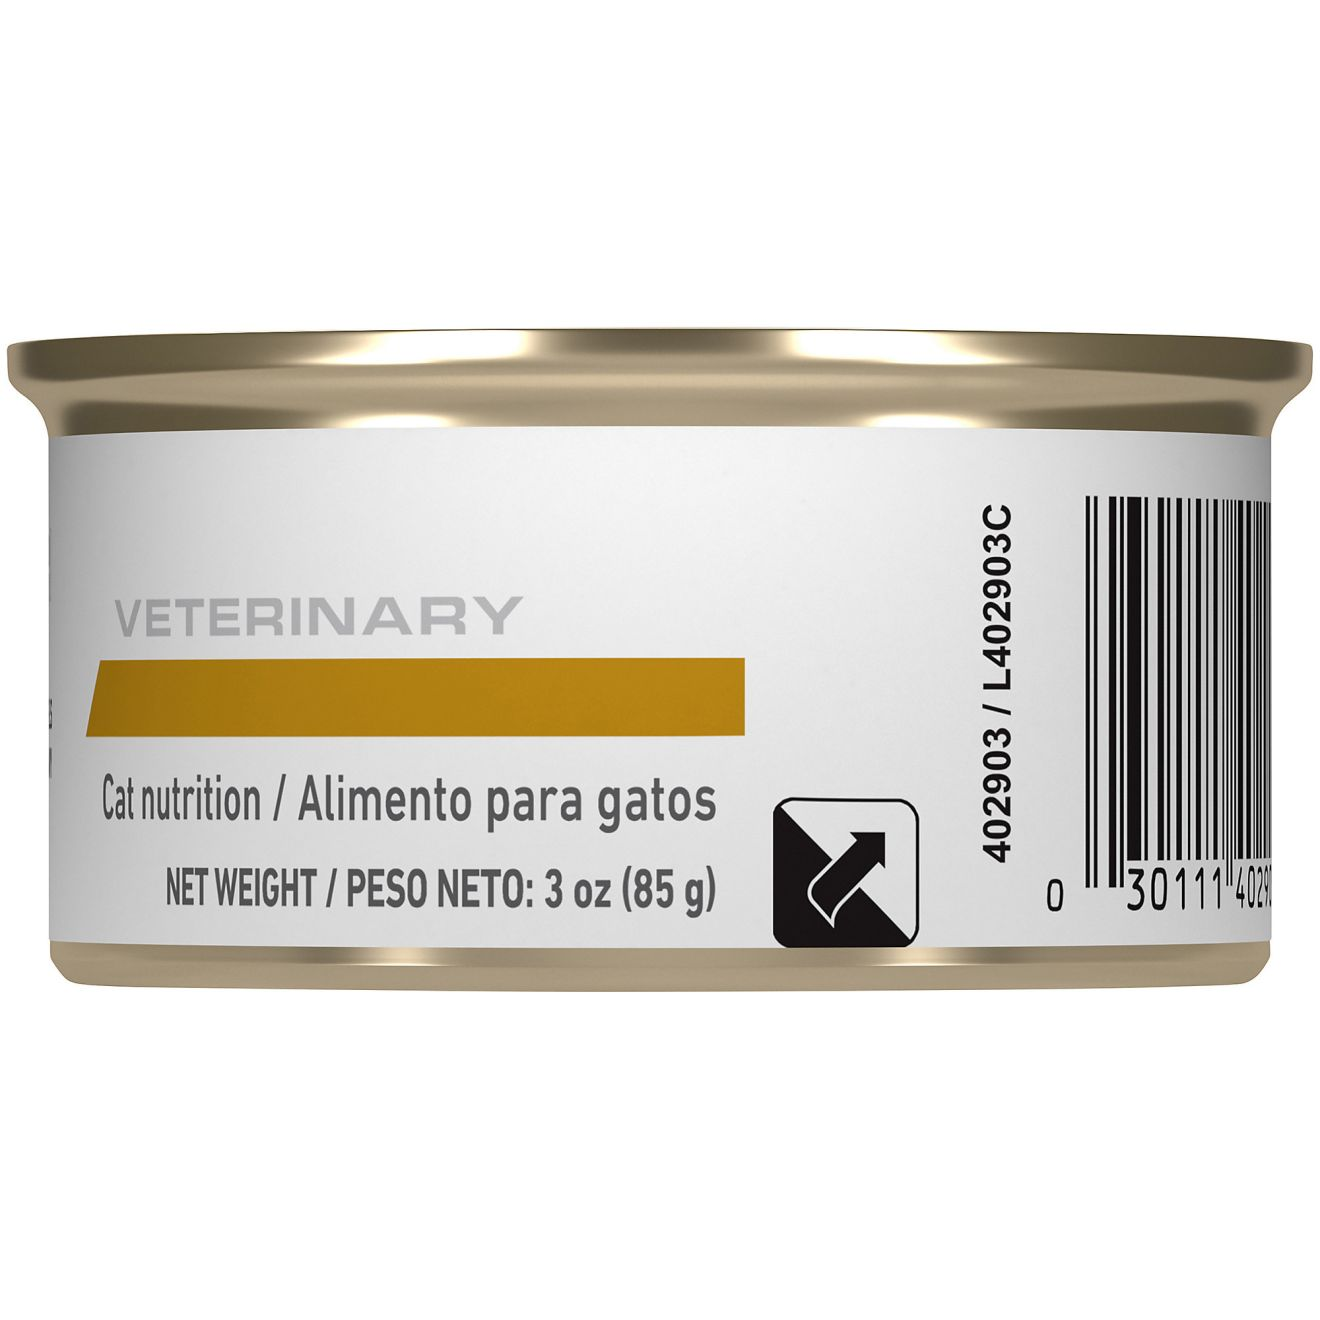 Feline Urinary SO® Moderate Calorie morsels in gravy